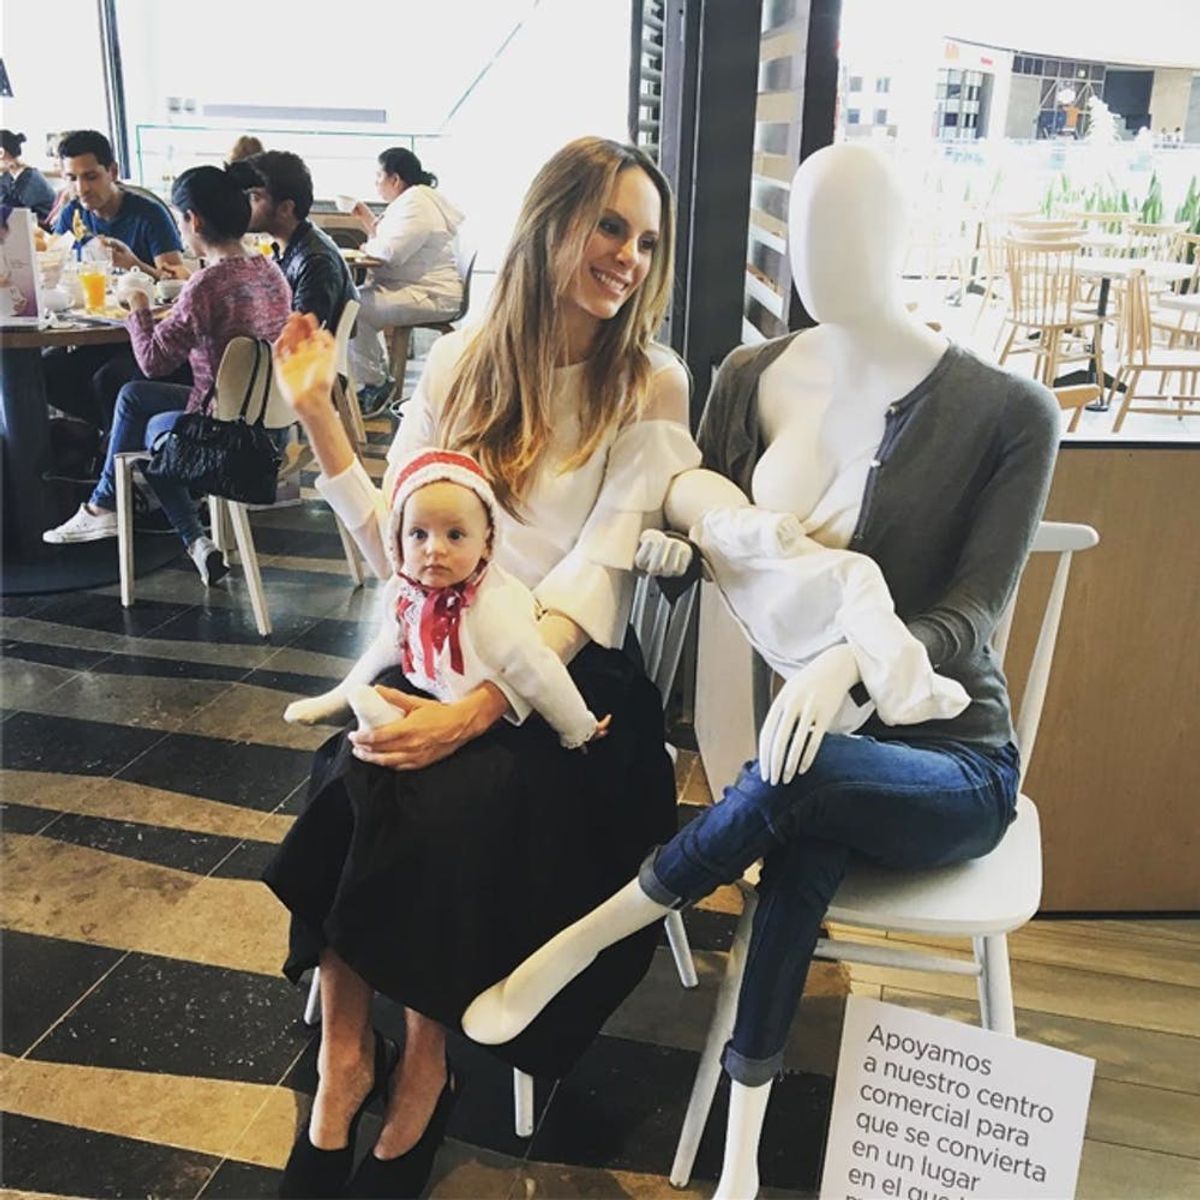 Breastfeeding Mannequins Are Now a Thing in International Malls